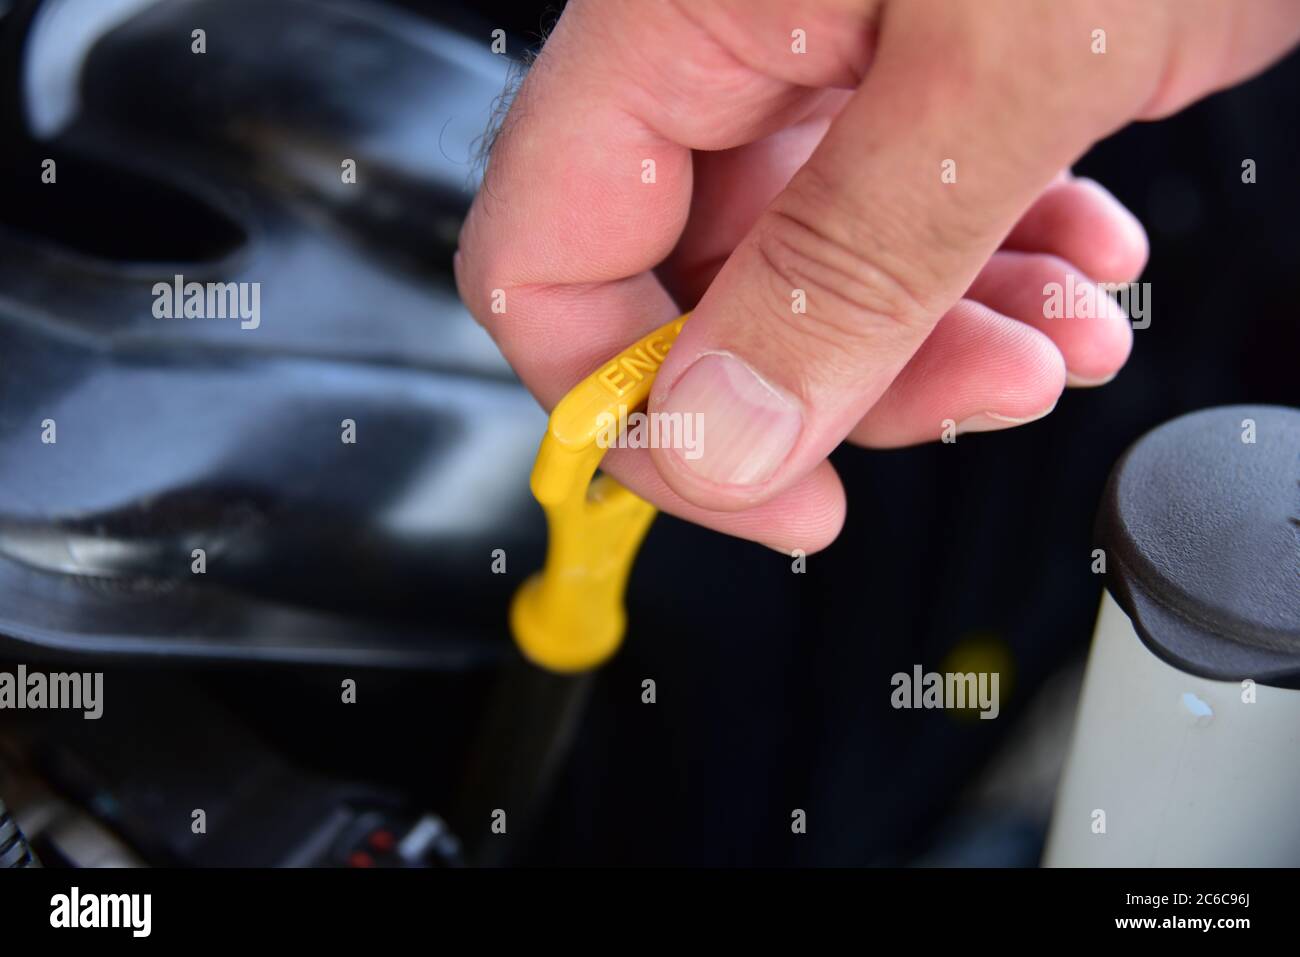 Checking the engine oil. A Person Checking the Motor Oil in Their Car Stock Photo